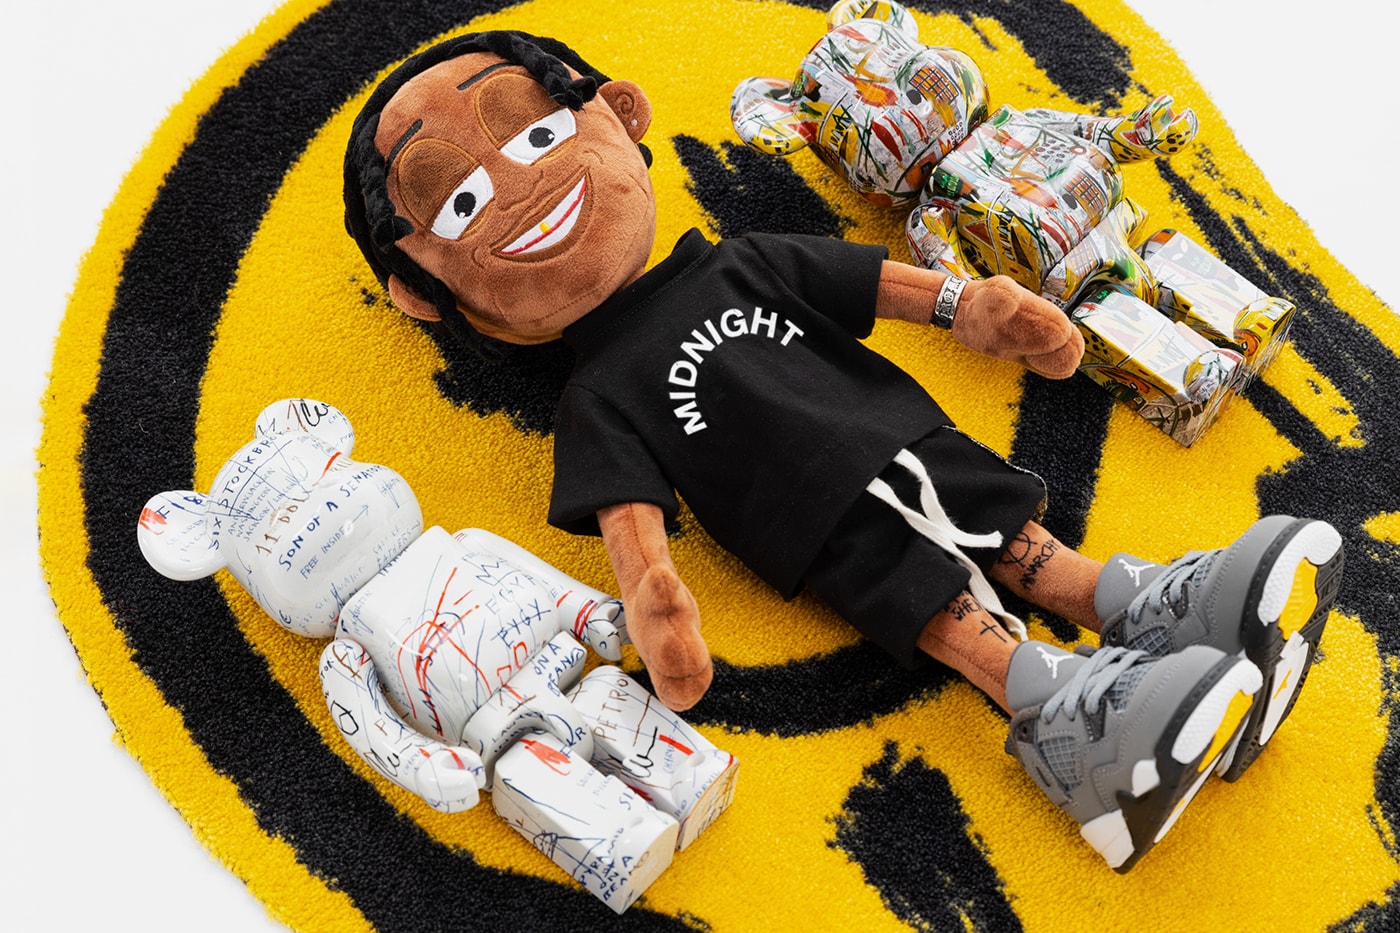 Bored Being A Toy A$AP Rocky Plush Toy Unveil Info Buy Price